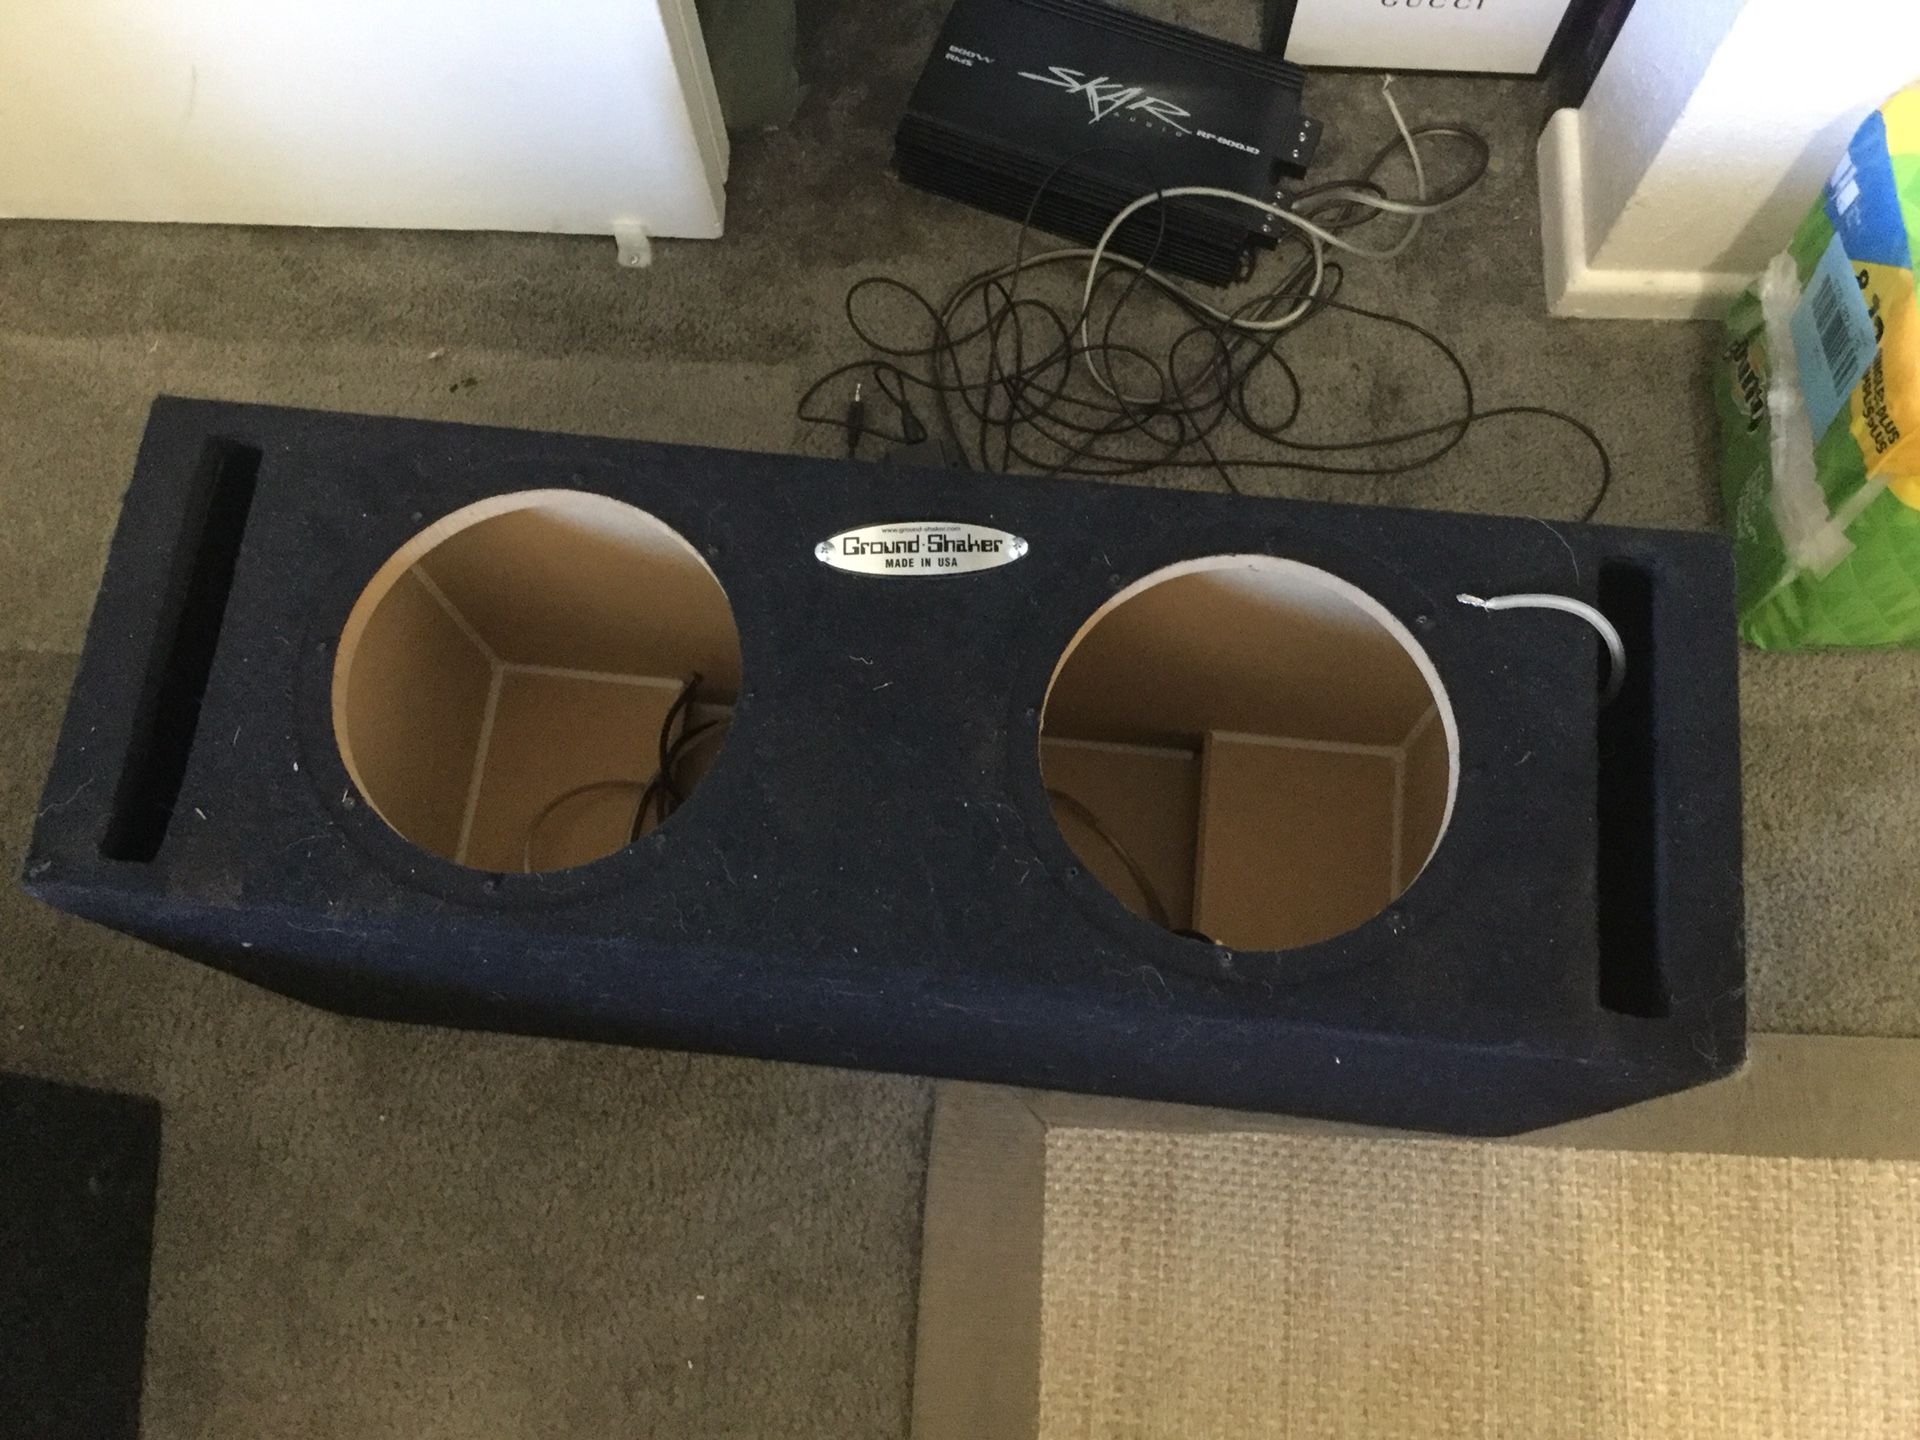 Groundshaker dual 8in subwoofer box